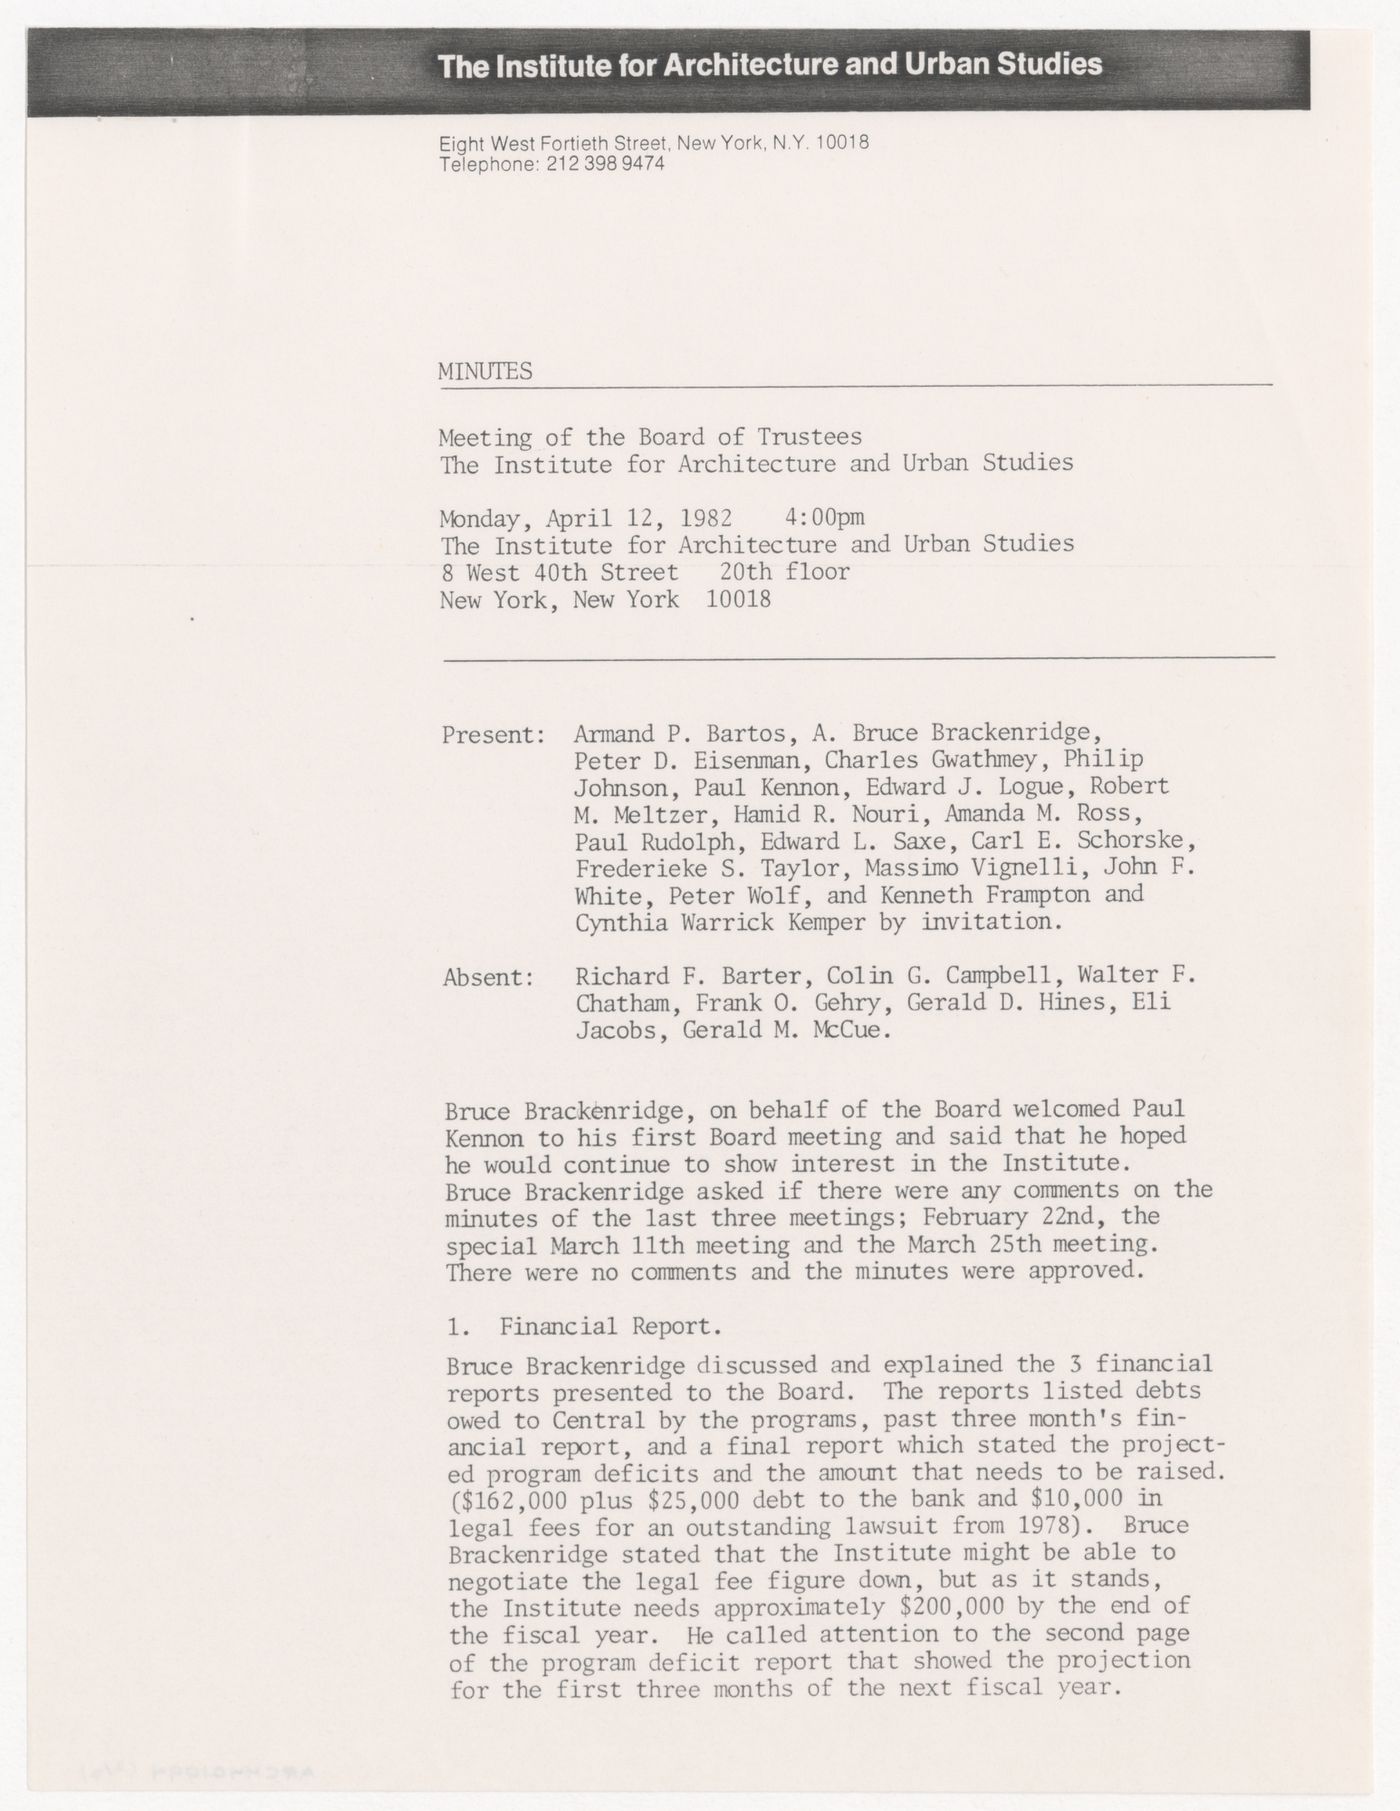 Memorandum from Hamid R. Nouri to the Board of Trustees with attached minutes for the meeting of the Board of Trustees of April 12th, 1982